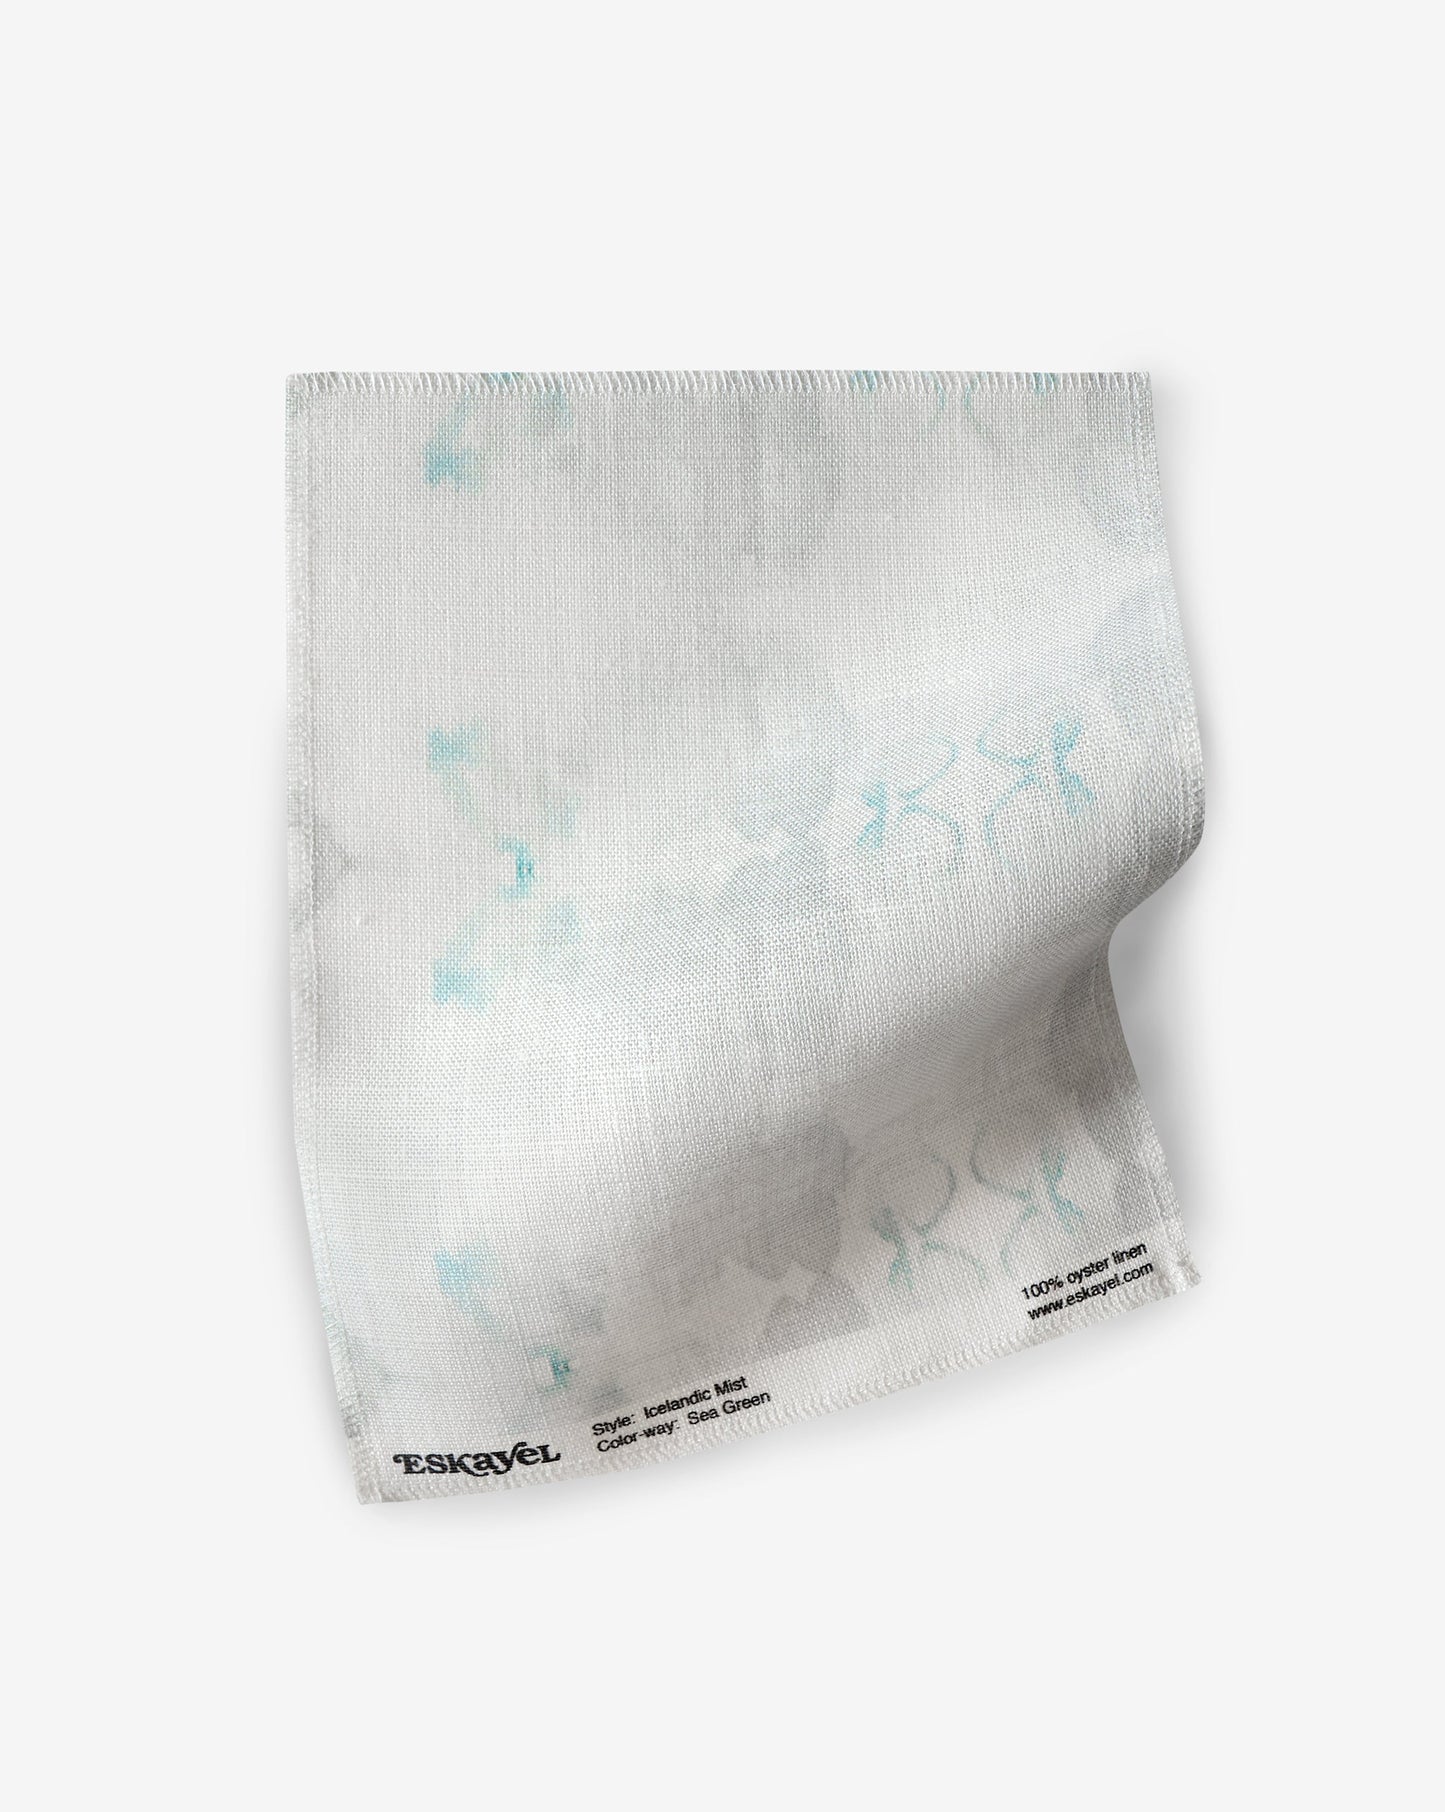 A white Icelandic Mist towel made of high-end luxury Sea Green fabric with blue and white flowers on it.